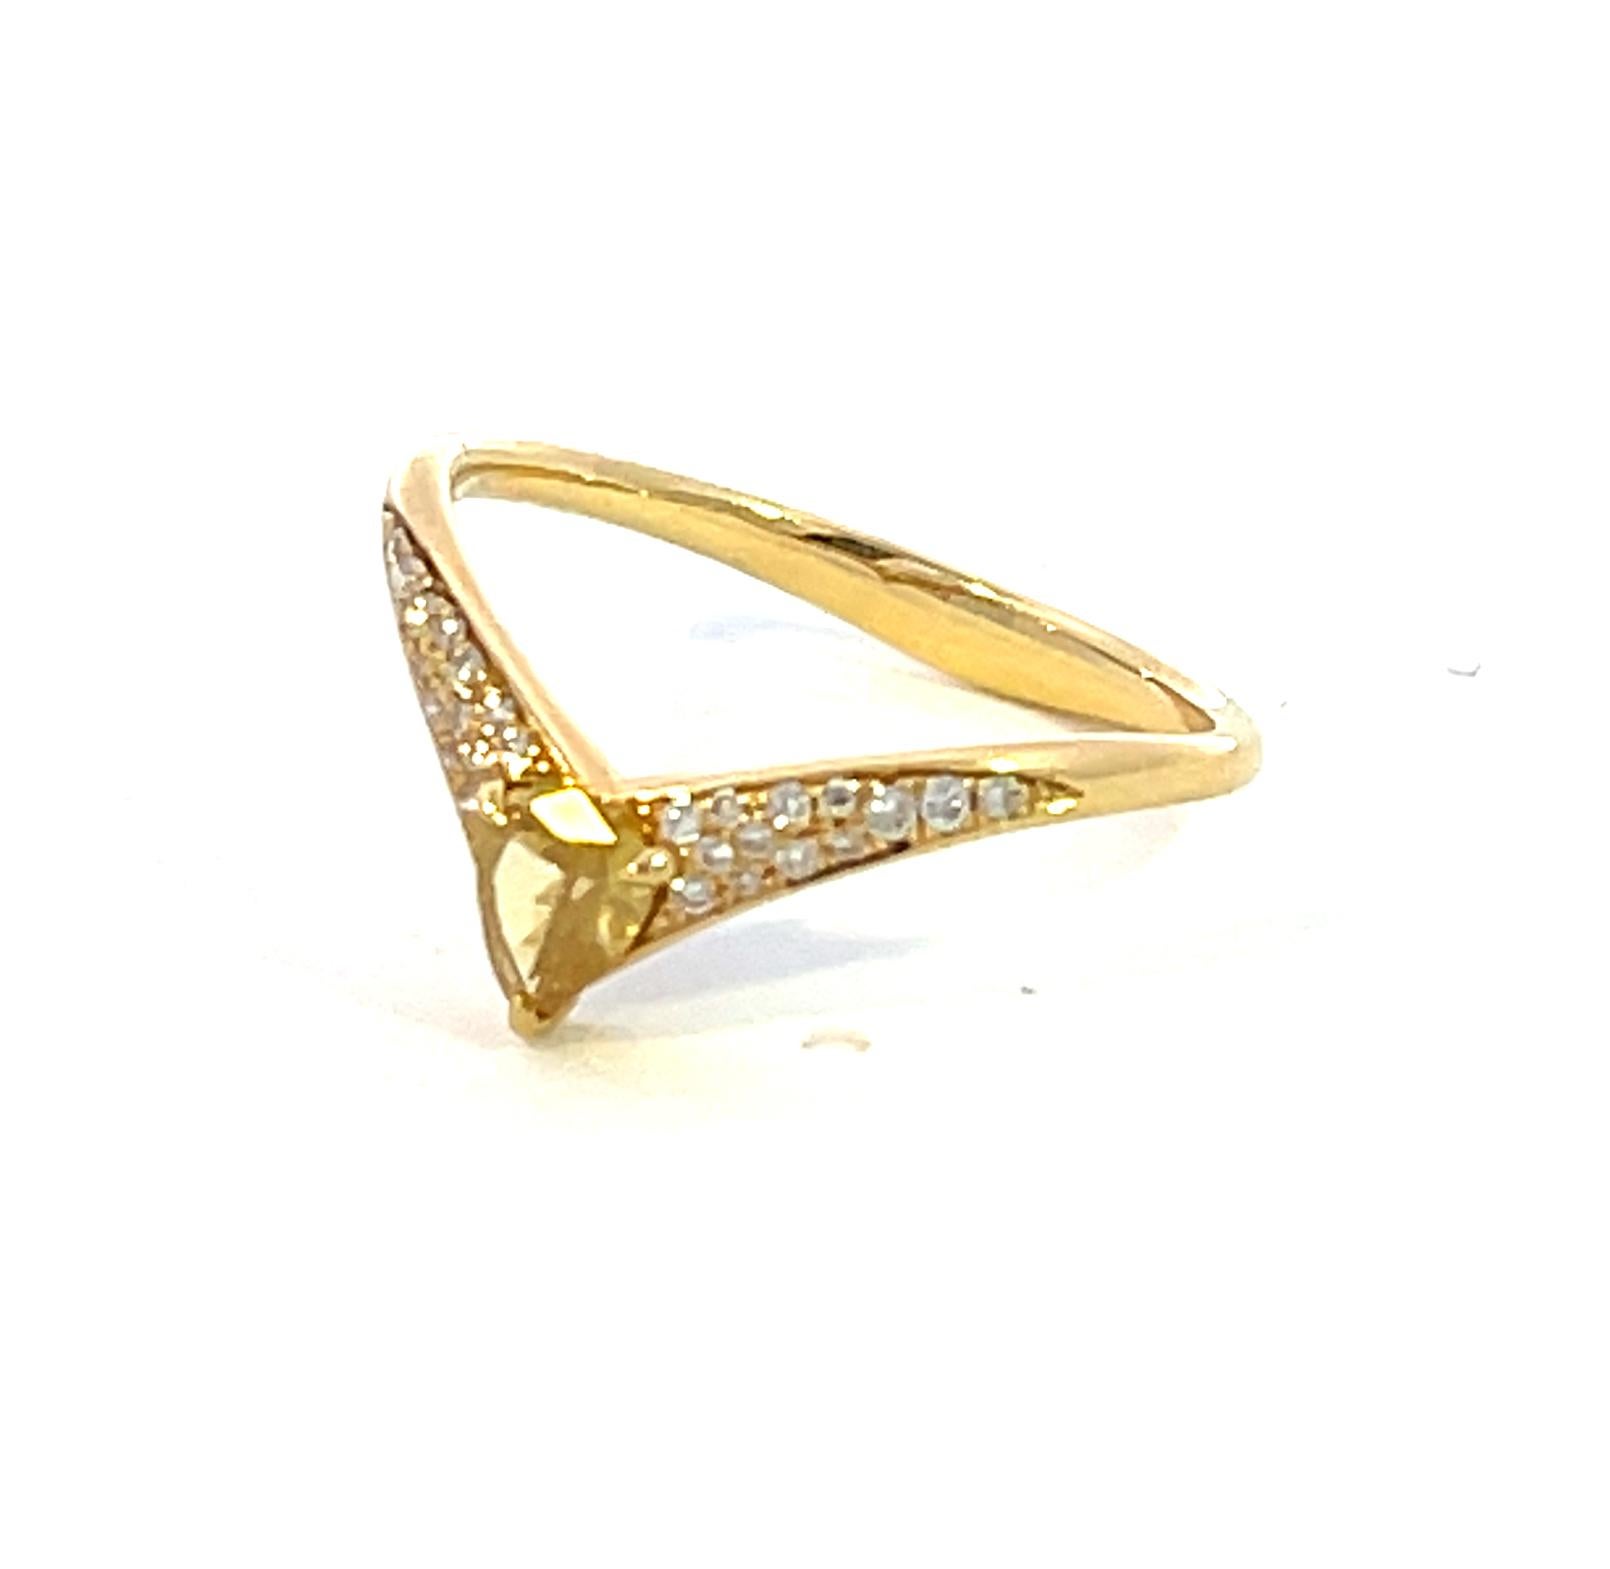 The ring is set in 18K Yellow Gold with One (1) Pear Shape Fancy Yellow weighing 0.27ctw (SI in Clarity) as the center. There are one row of diamonds on each sides 0.10ctw (26 Round Brilliant Cut Diamonds). 

It is currently sized at a size 7 but